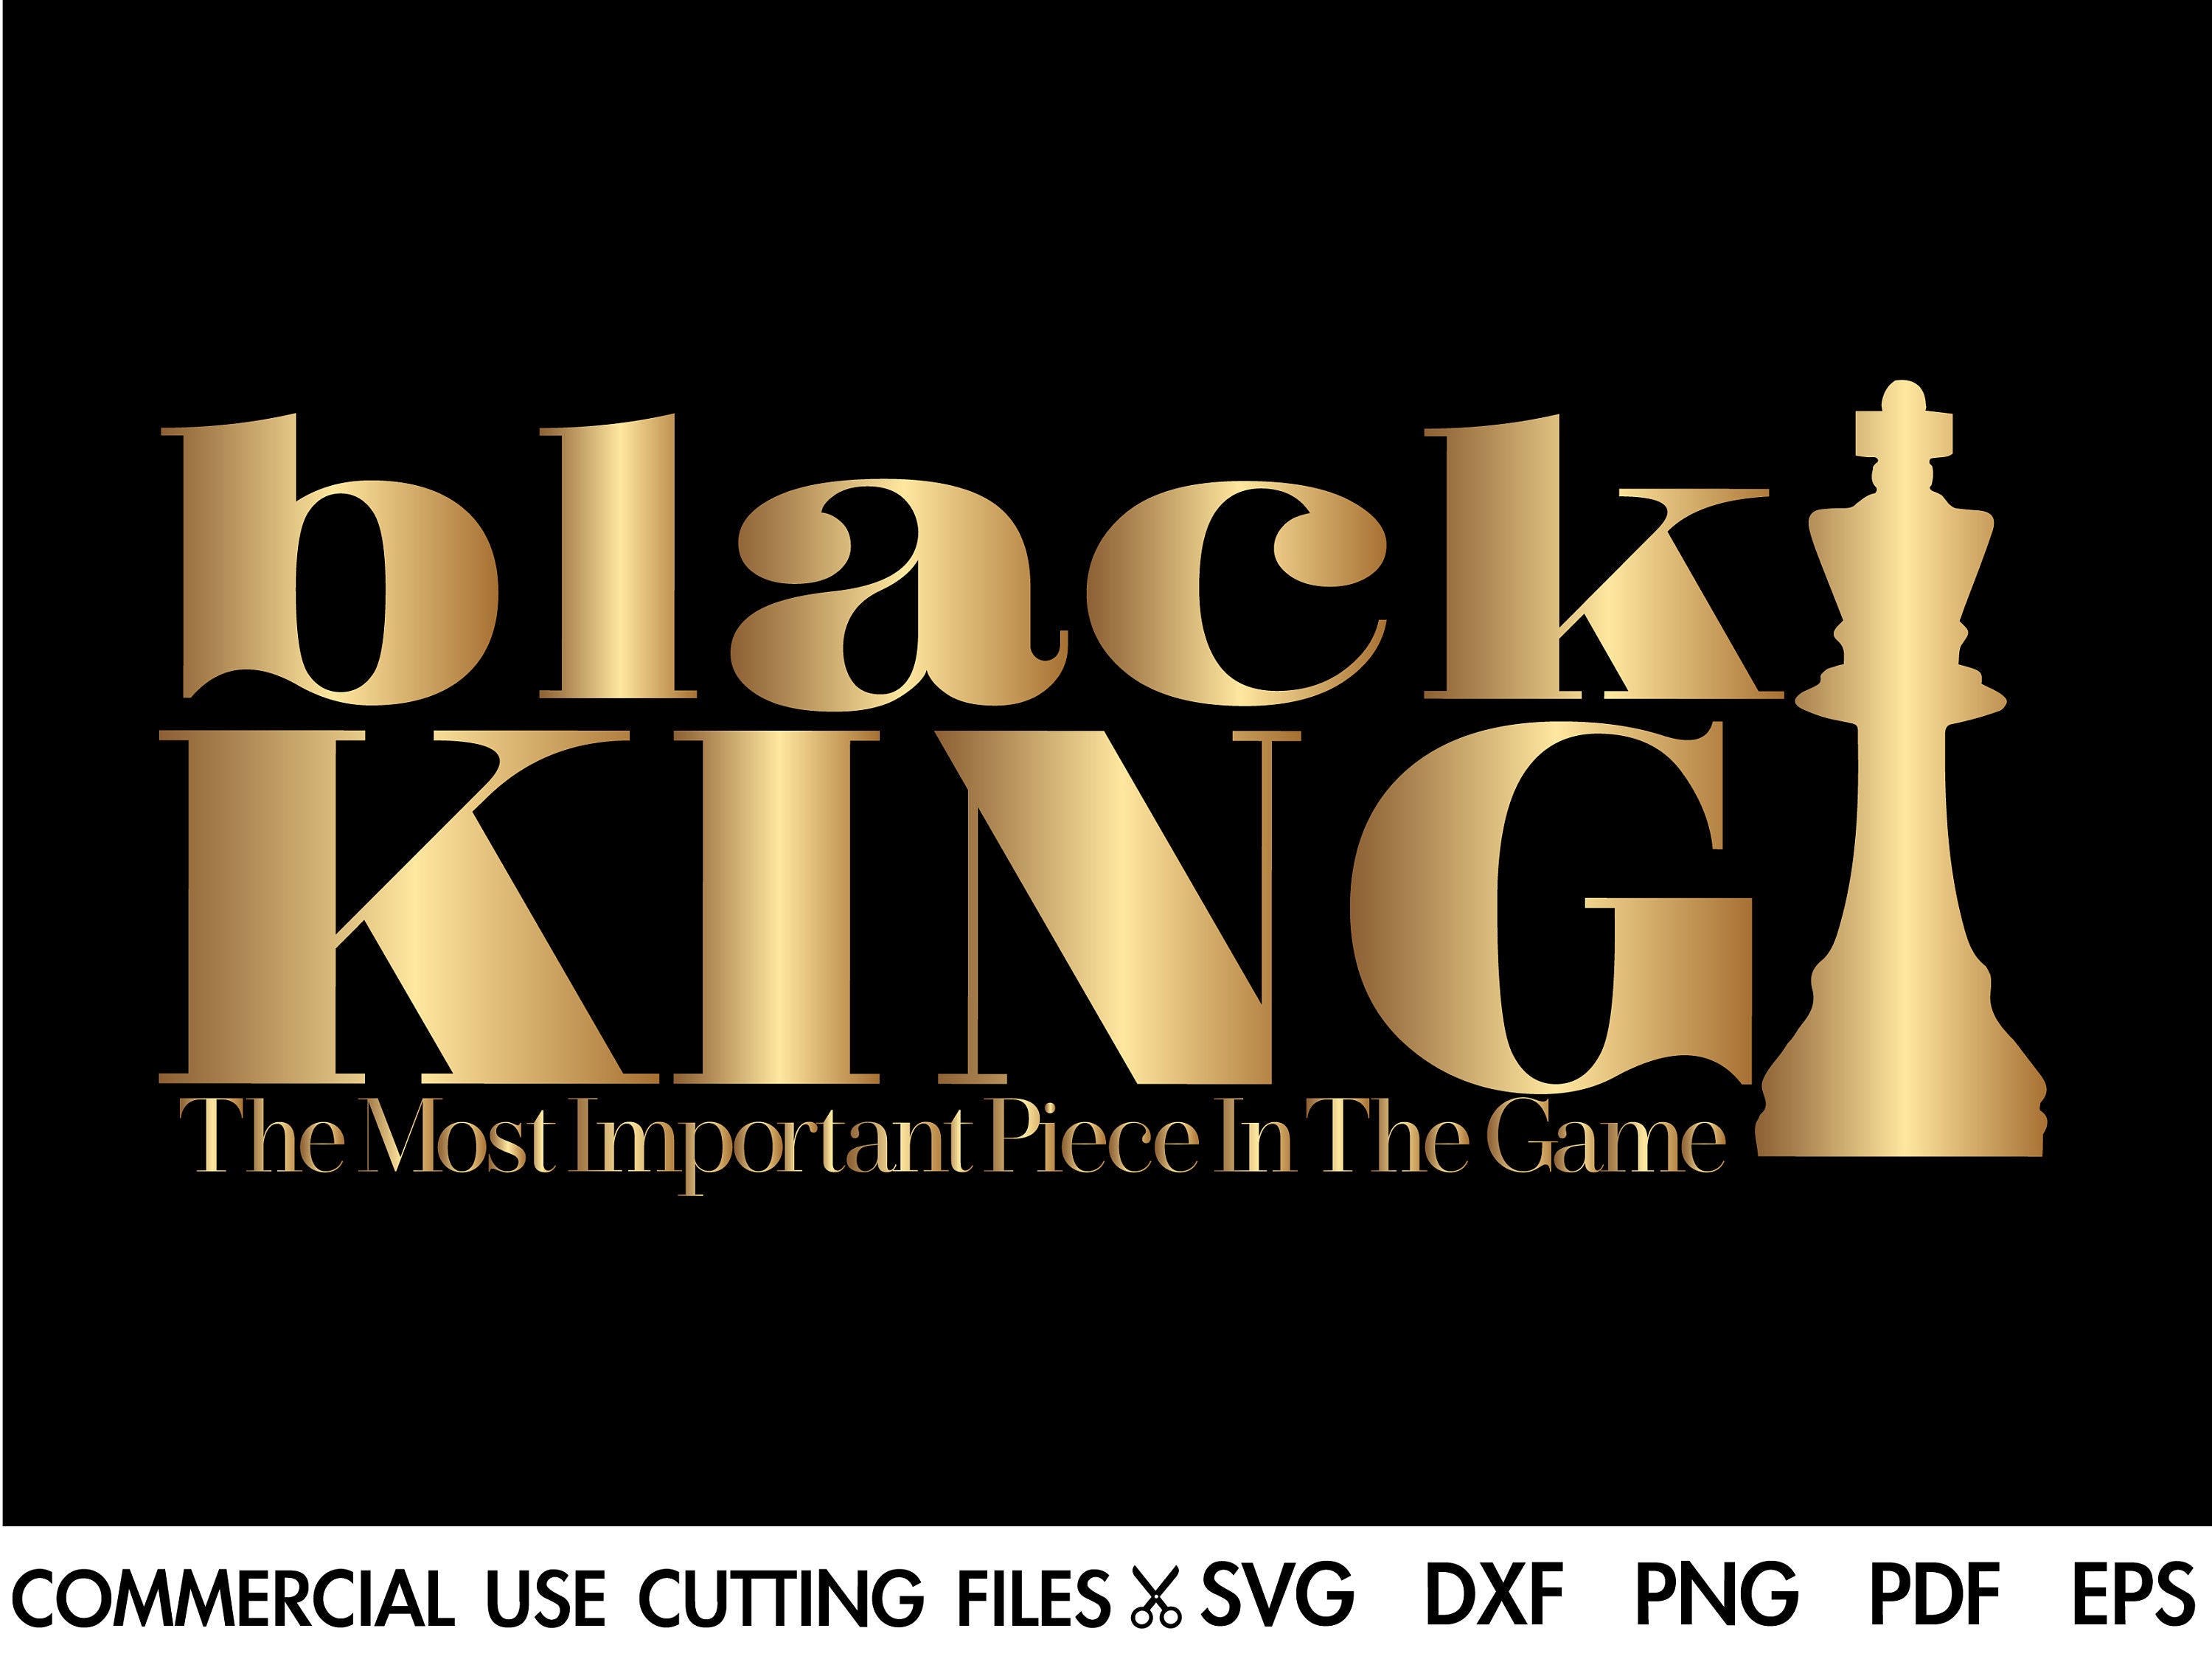 Black King The Most Powerful Piece In The Game Chess T-Shirt